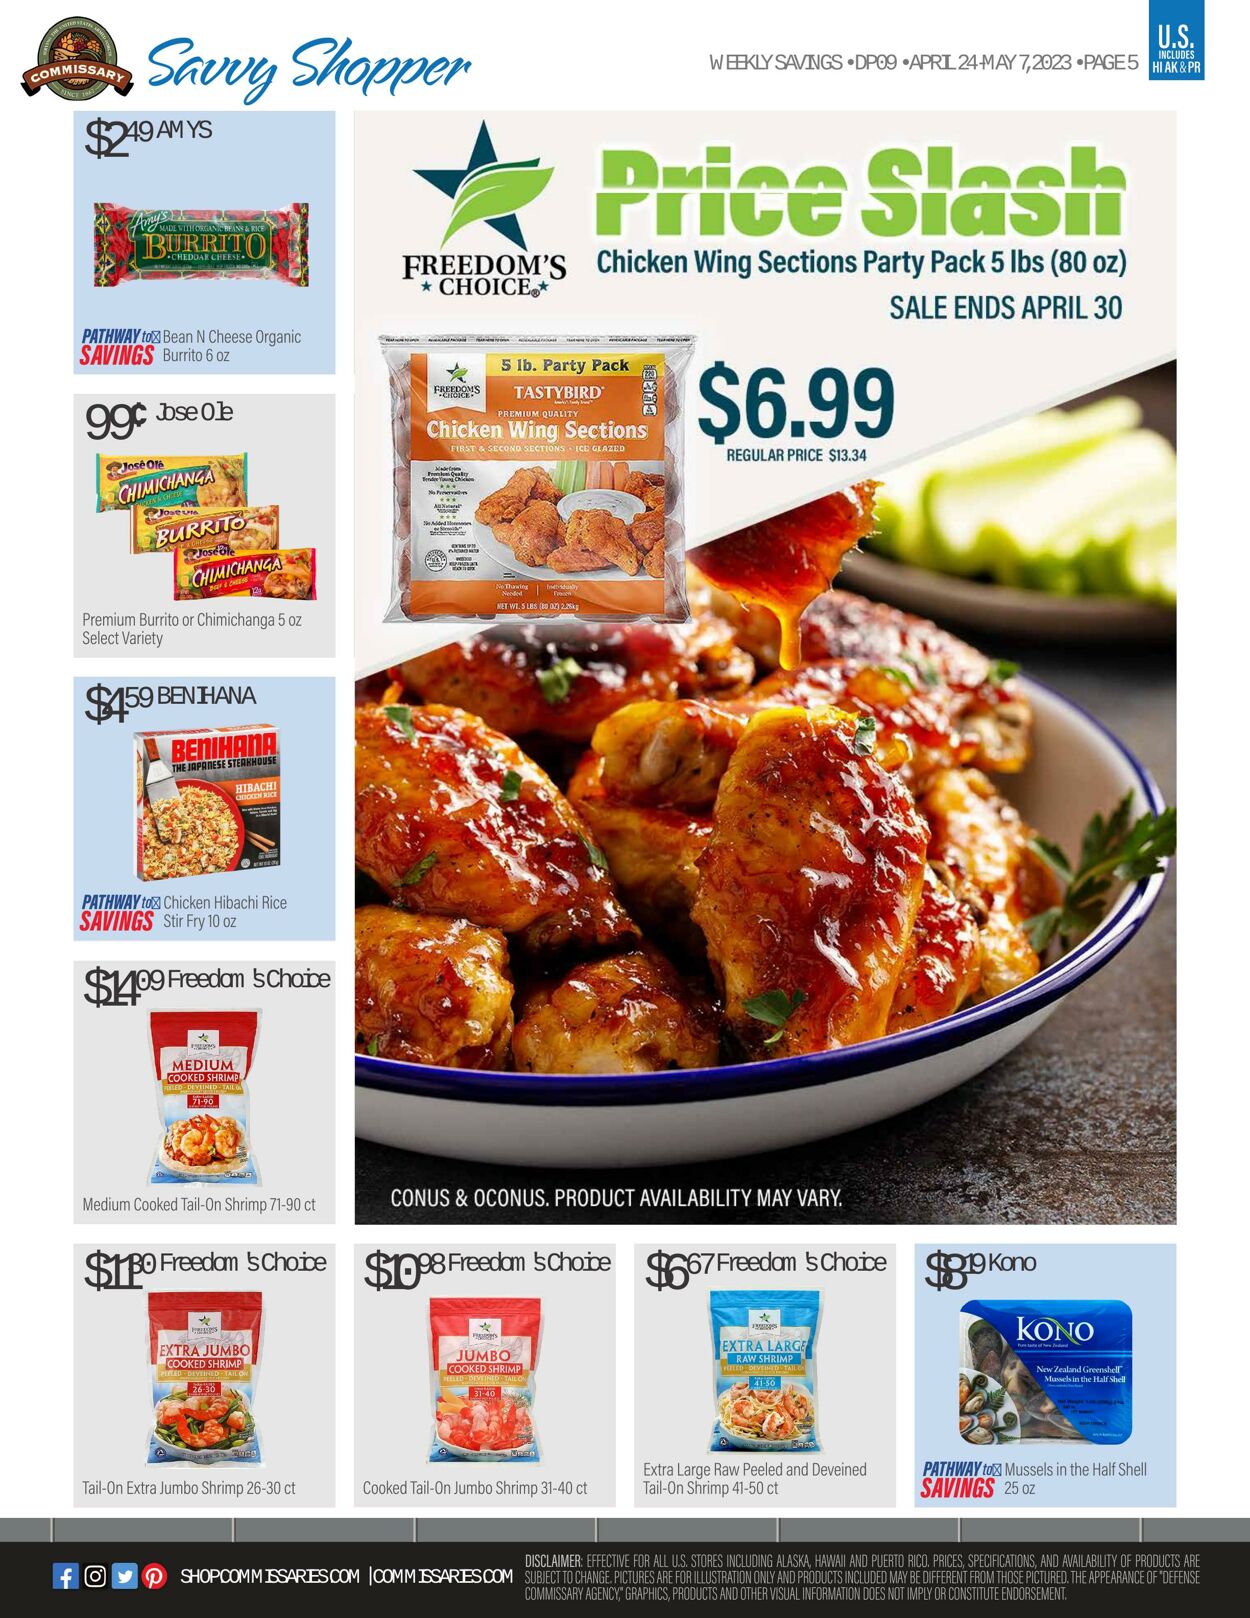 Weekly ad Commissary 04/24/2023 - 05/07/2023